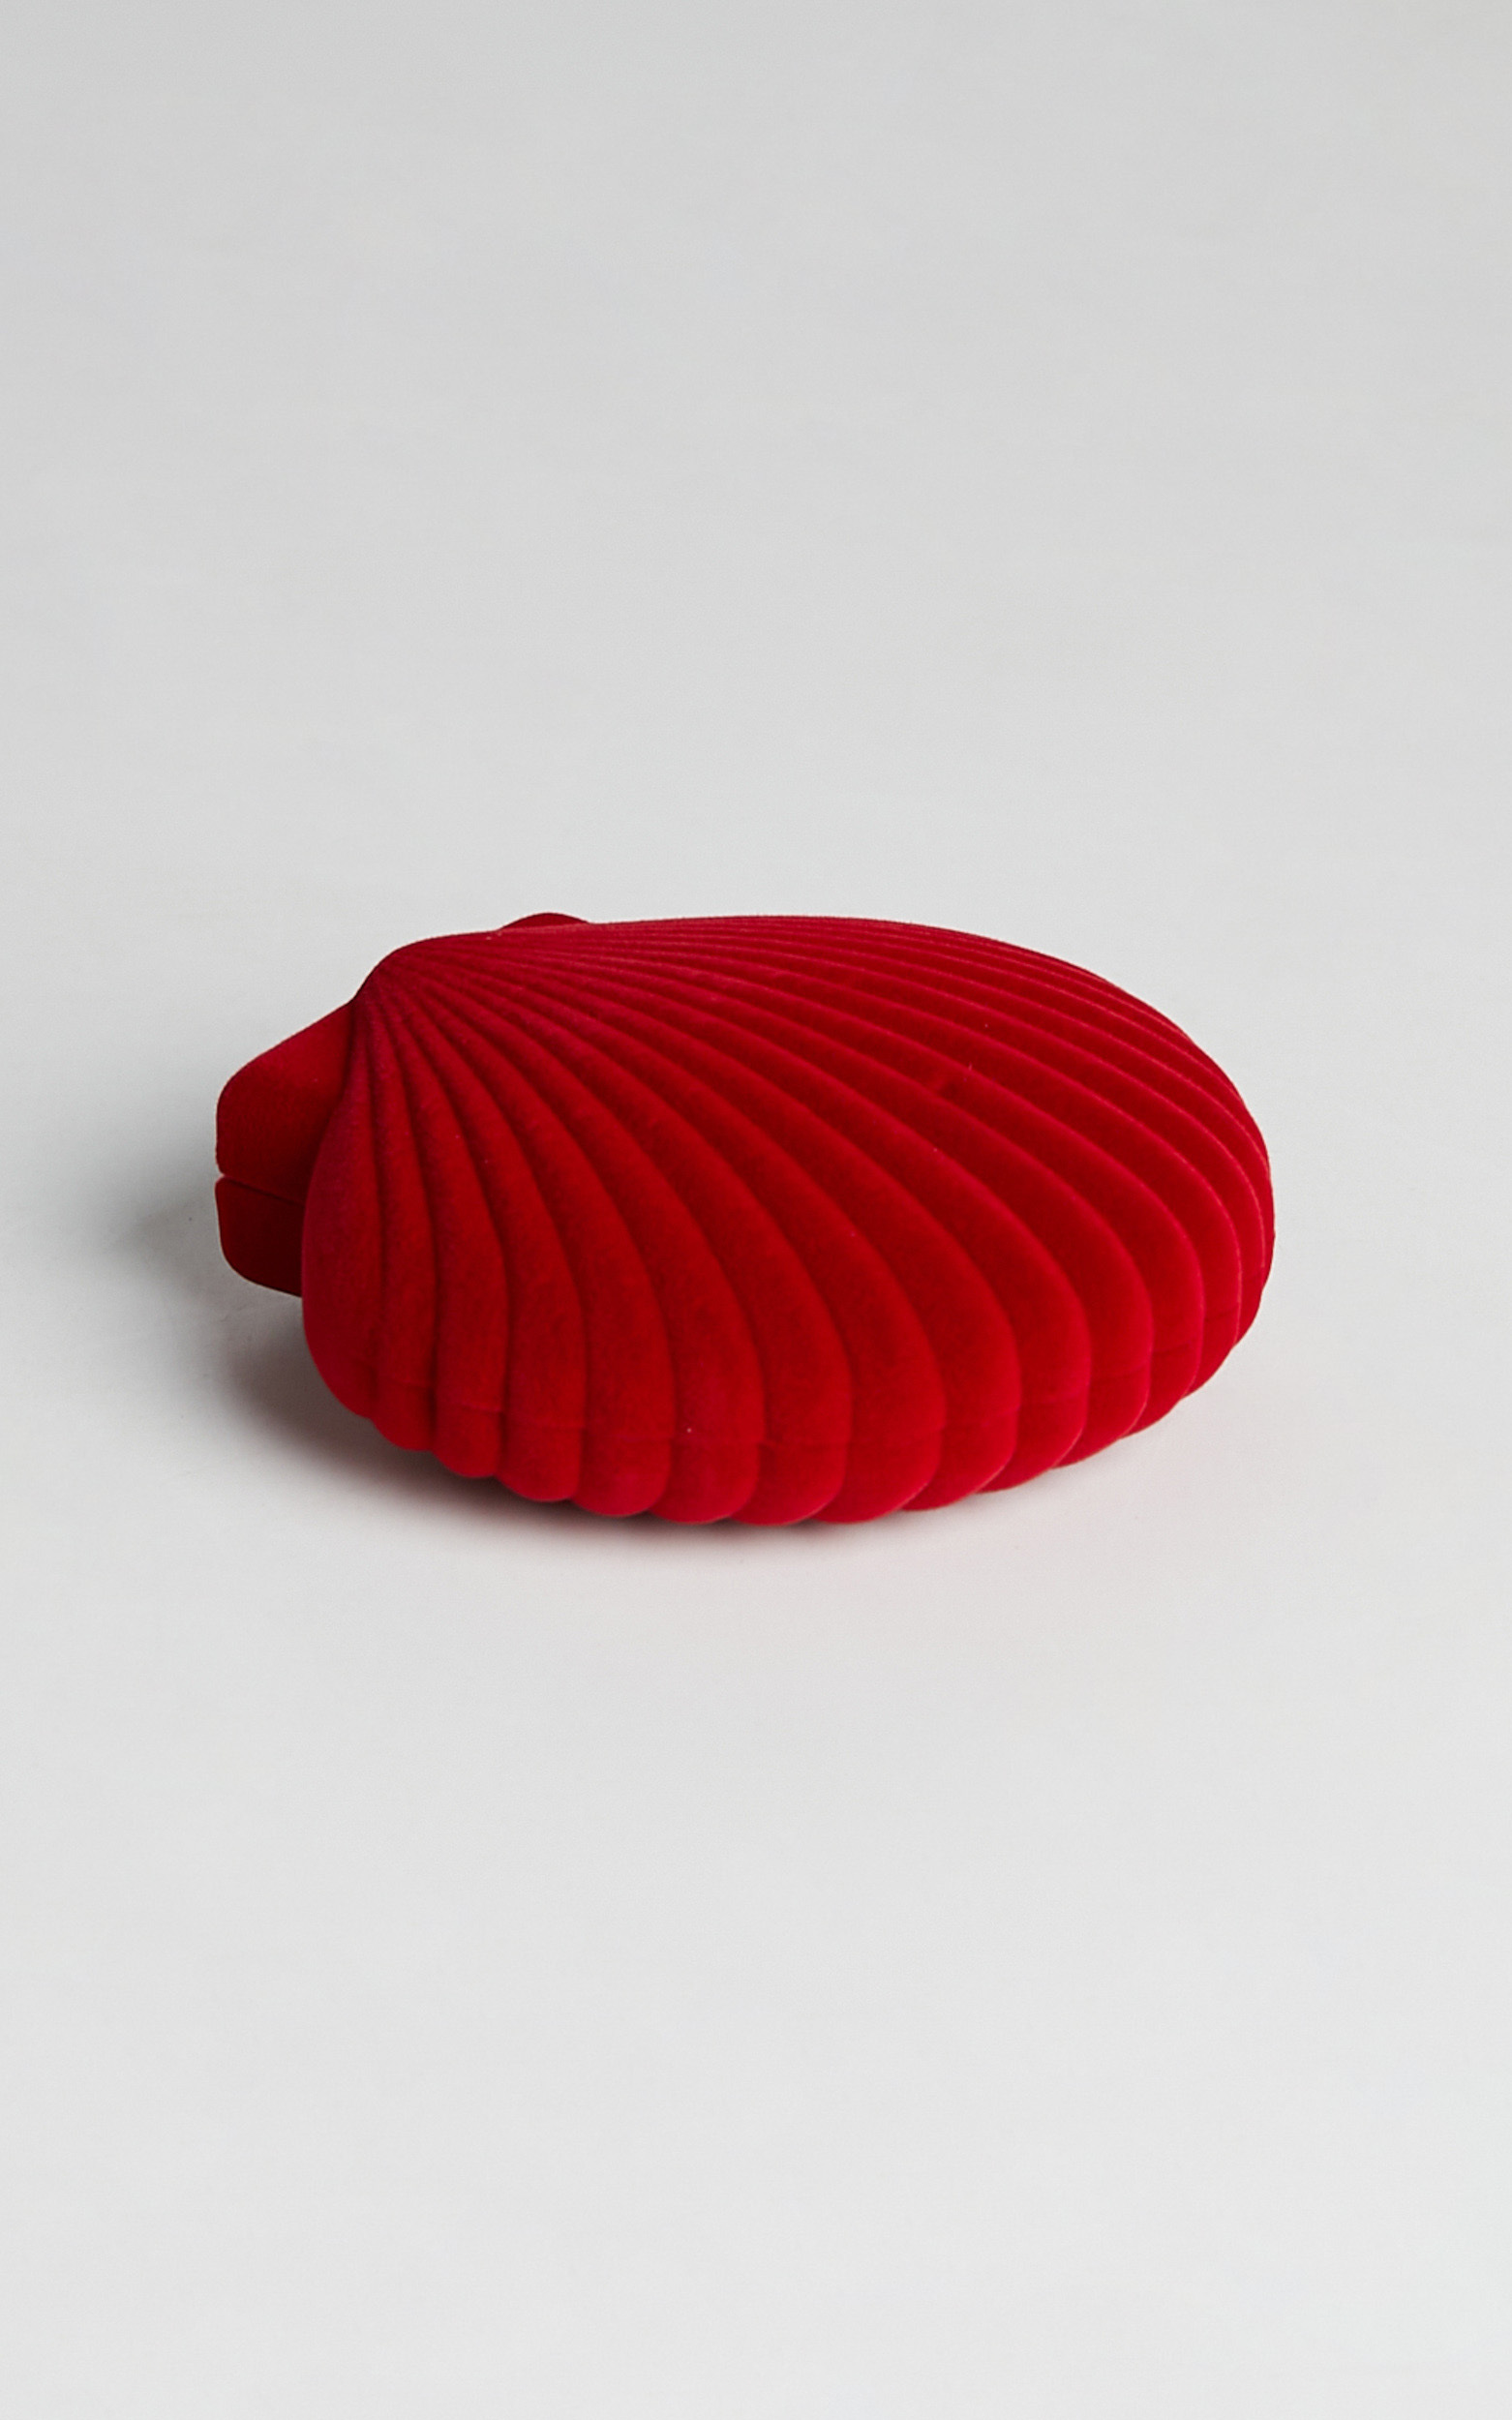 DOIY - Venus Shell Jewellery Box in Red - NoSize, RED1, hi-res image number null